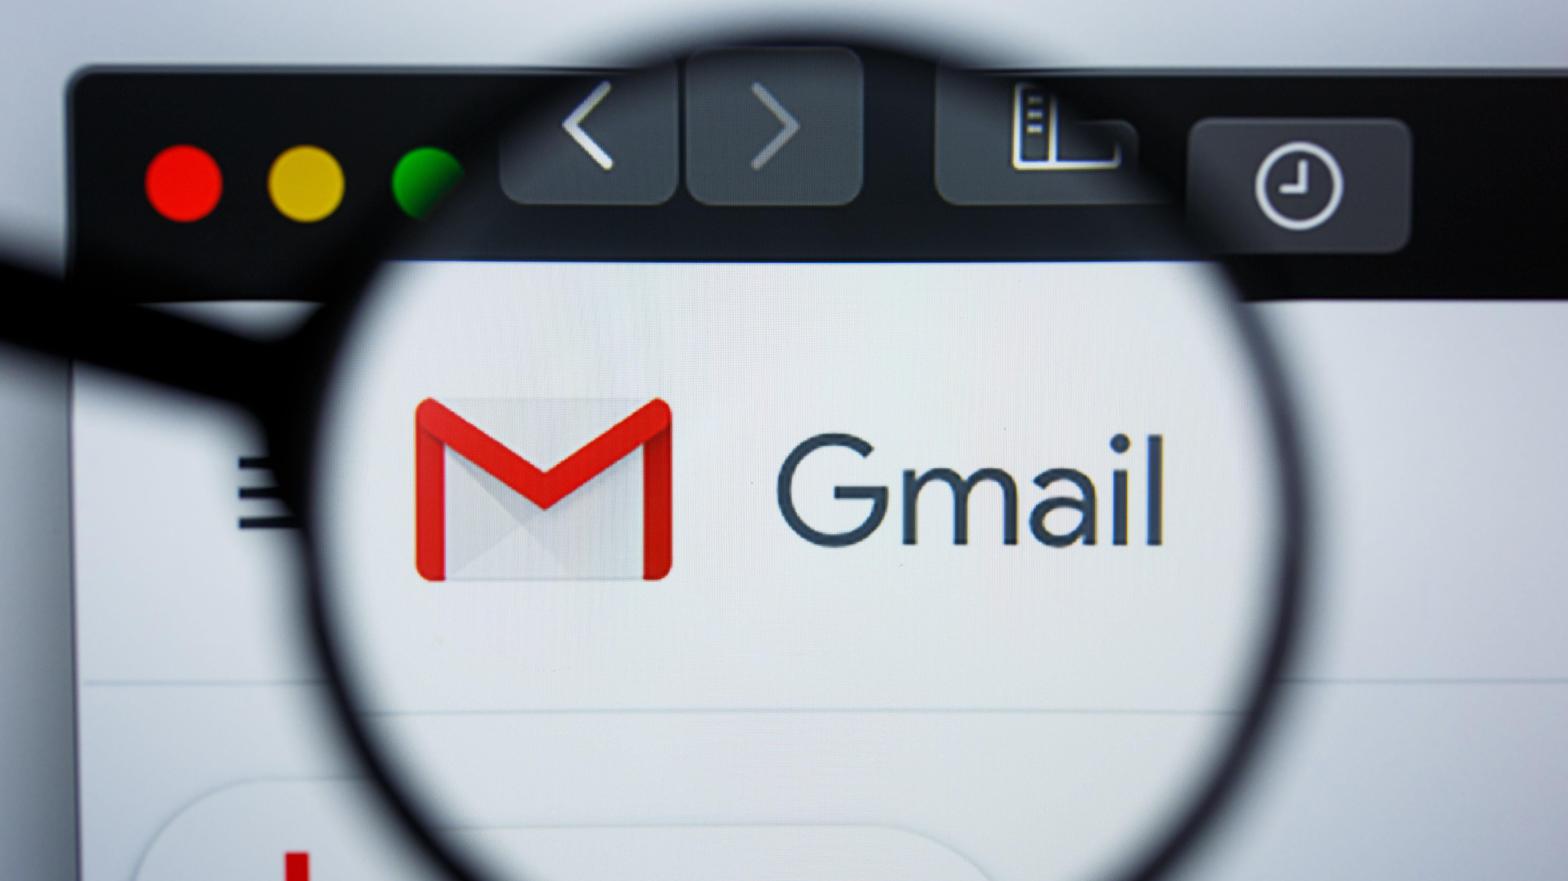 Prepare yourselves. More political spam may be coming to Gmail this year. (Photo: II.studio, Shutterstock)